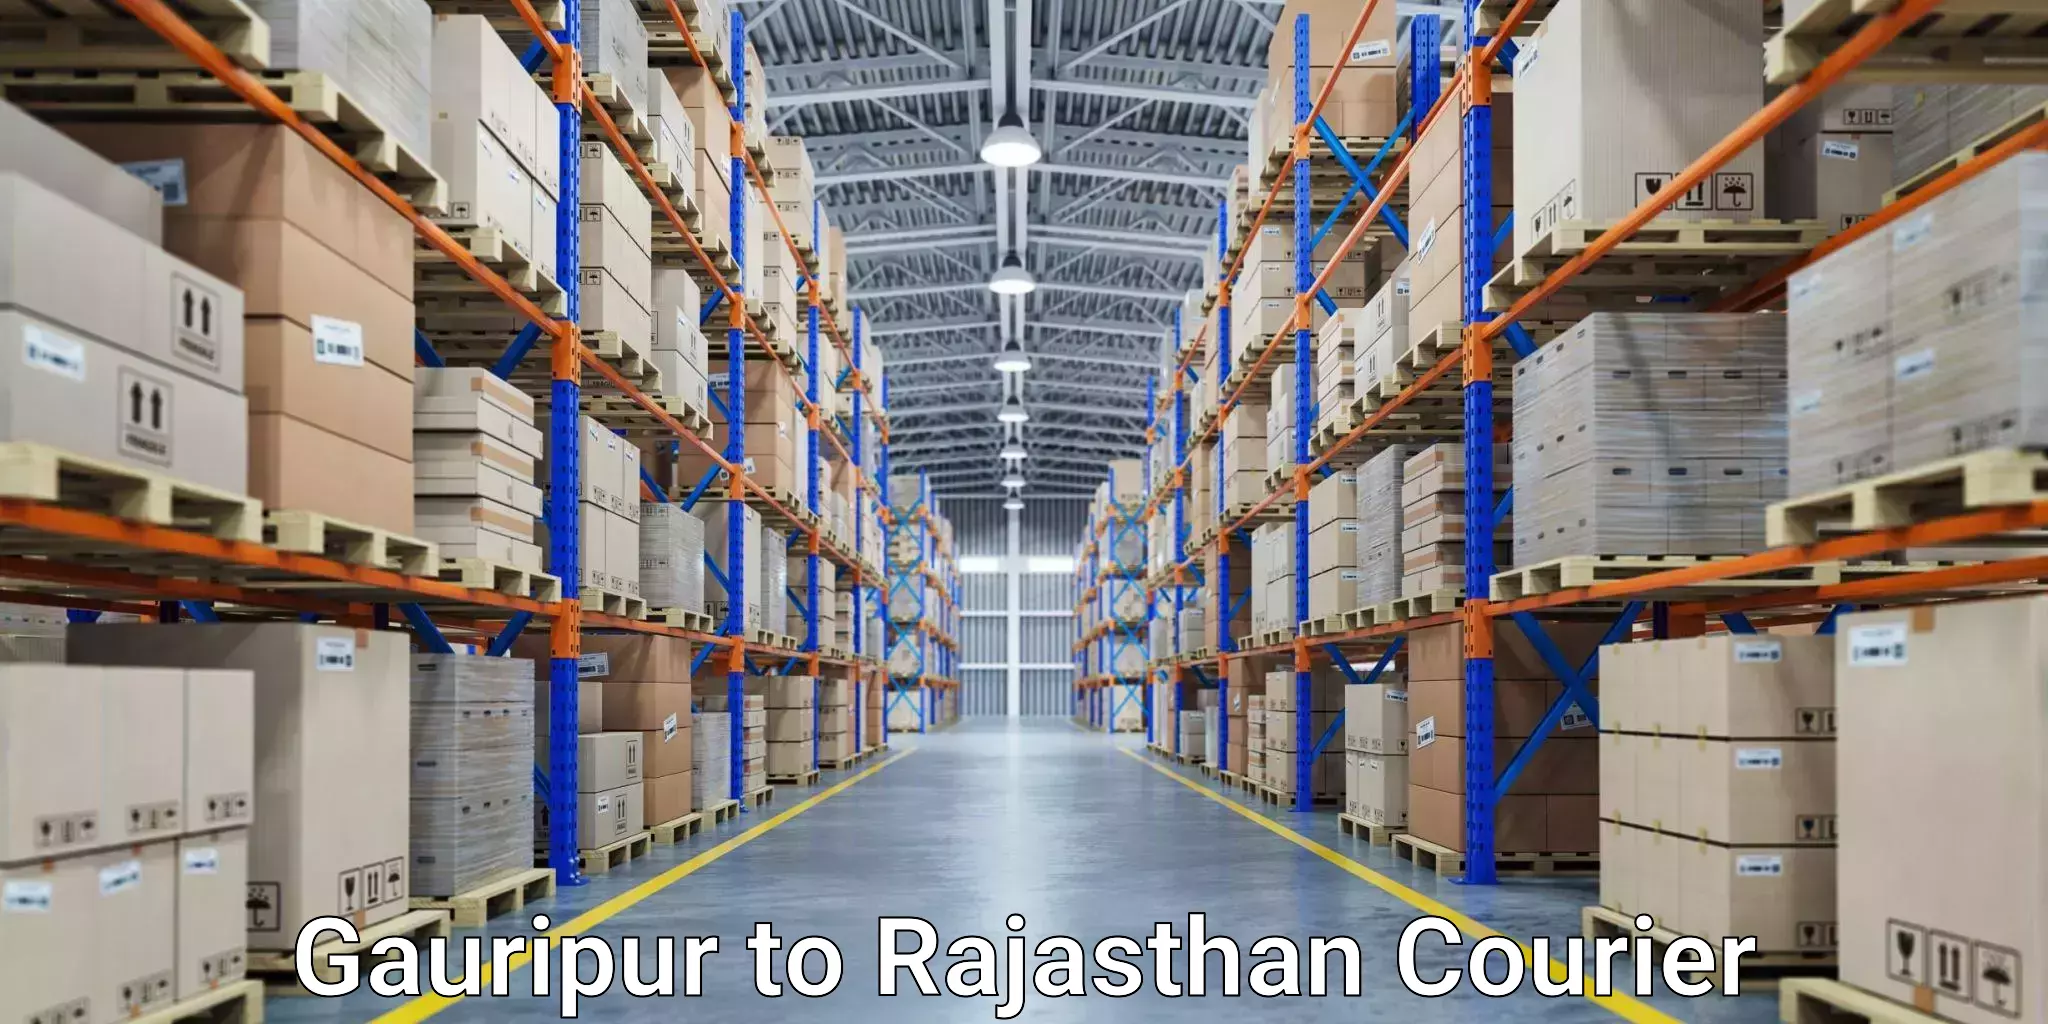 Global shipping networks Gauripur to Yeswanthapur